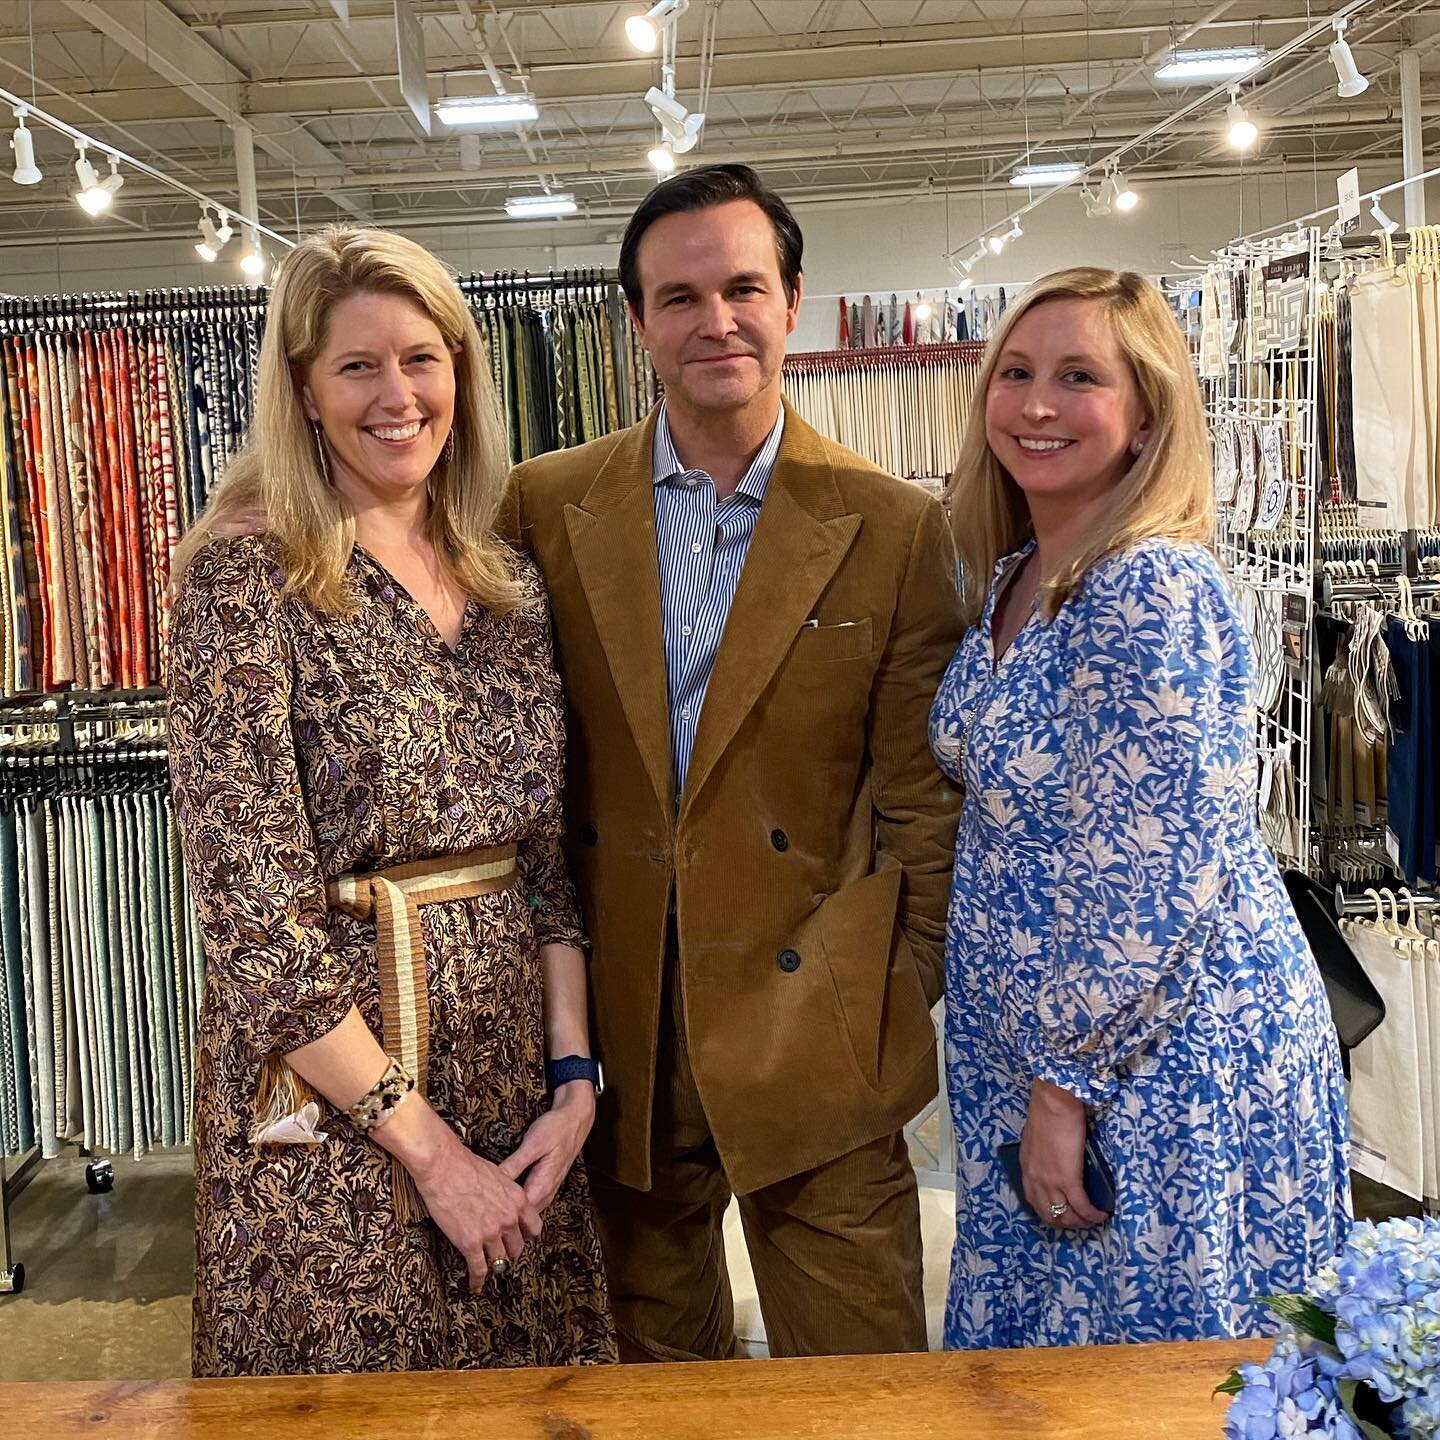 What a treat being with Mark Sikes! Fun that we share a kindred design spirit. 💙
.
.
.
.
#timelessdesign #markdsikes #classicdesign #design #decor #interiordesign #fennebresqueinteriors